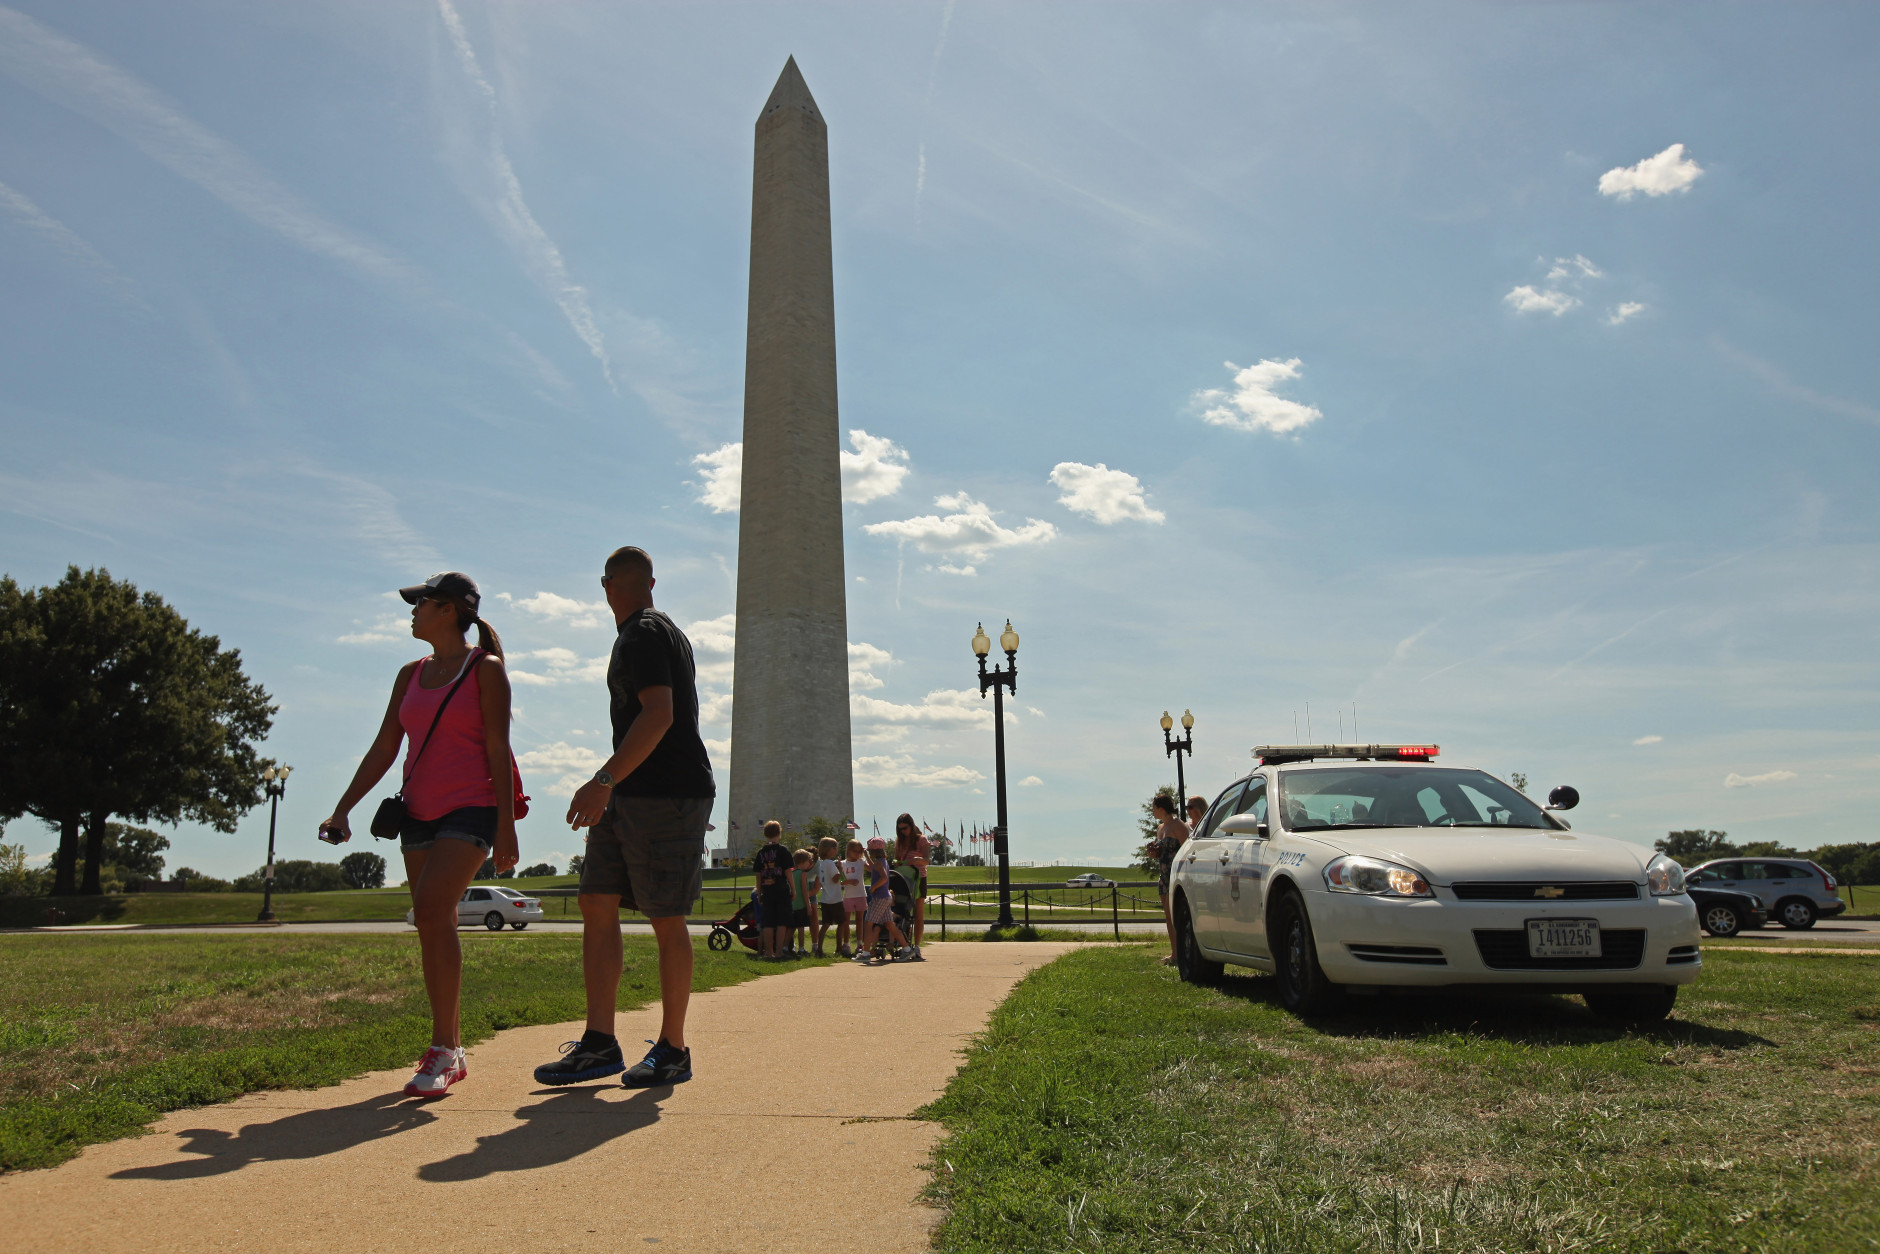 WASHINGTON, DC - AUGUST 23:  U.S. Park Police work to keep people away from the area surrounding the Washington Monument after a 5.8 magnitude earthquake struck the east coast August 23, 2011 in Washington, DC. Police officers said that unidentified material had fallen off the Washington Monument as a result of the earthquake. All the monuments and buildings along the National Mall have been evacuated and closed.  (Photo by Chip Somodevilla/Getty Images)